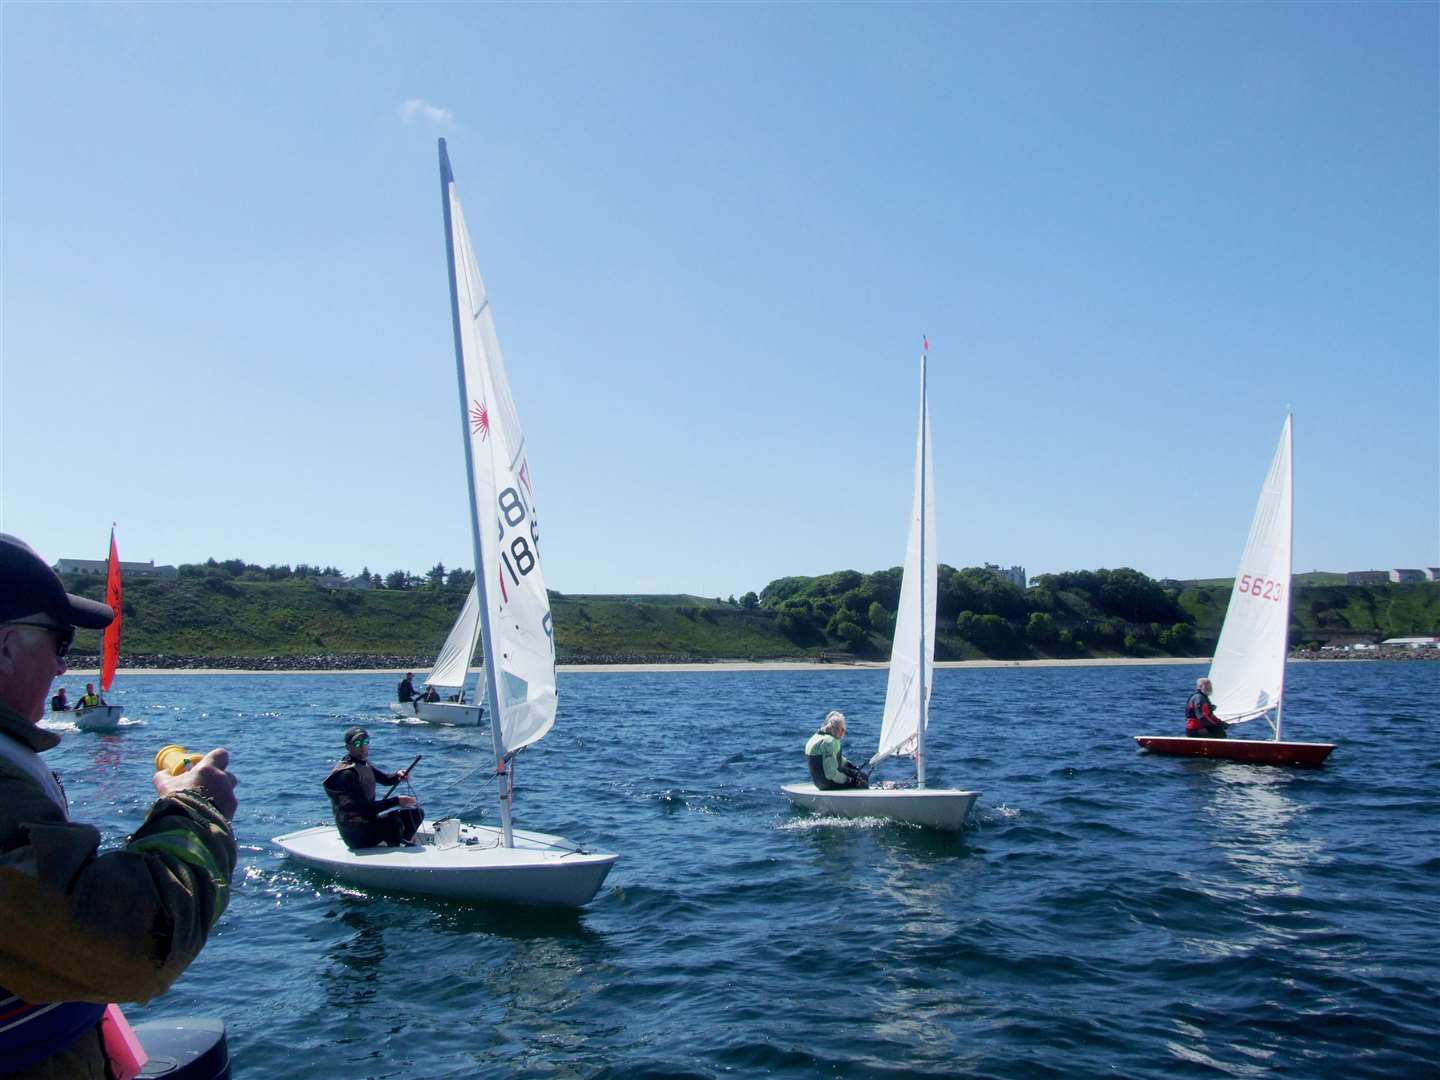 Lasers of Mark Johnston (nearest), Marjory Lord (middle) and Martin Lord (farthest away) with Bosun and Mirror behind at the start of race three.